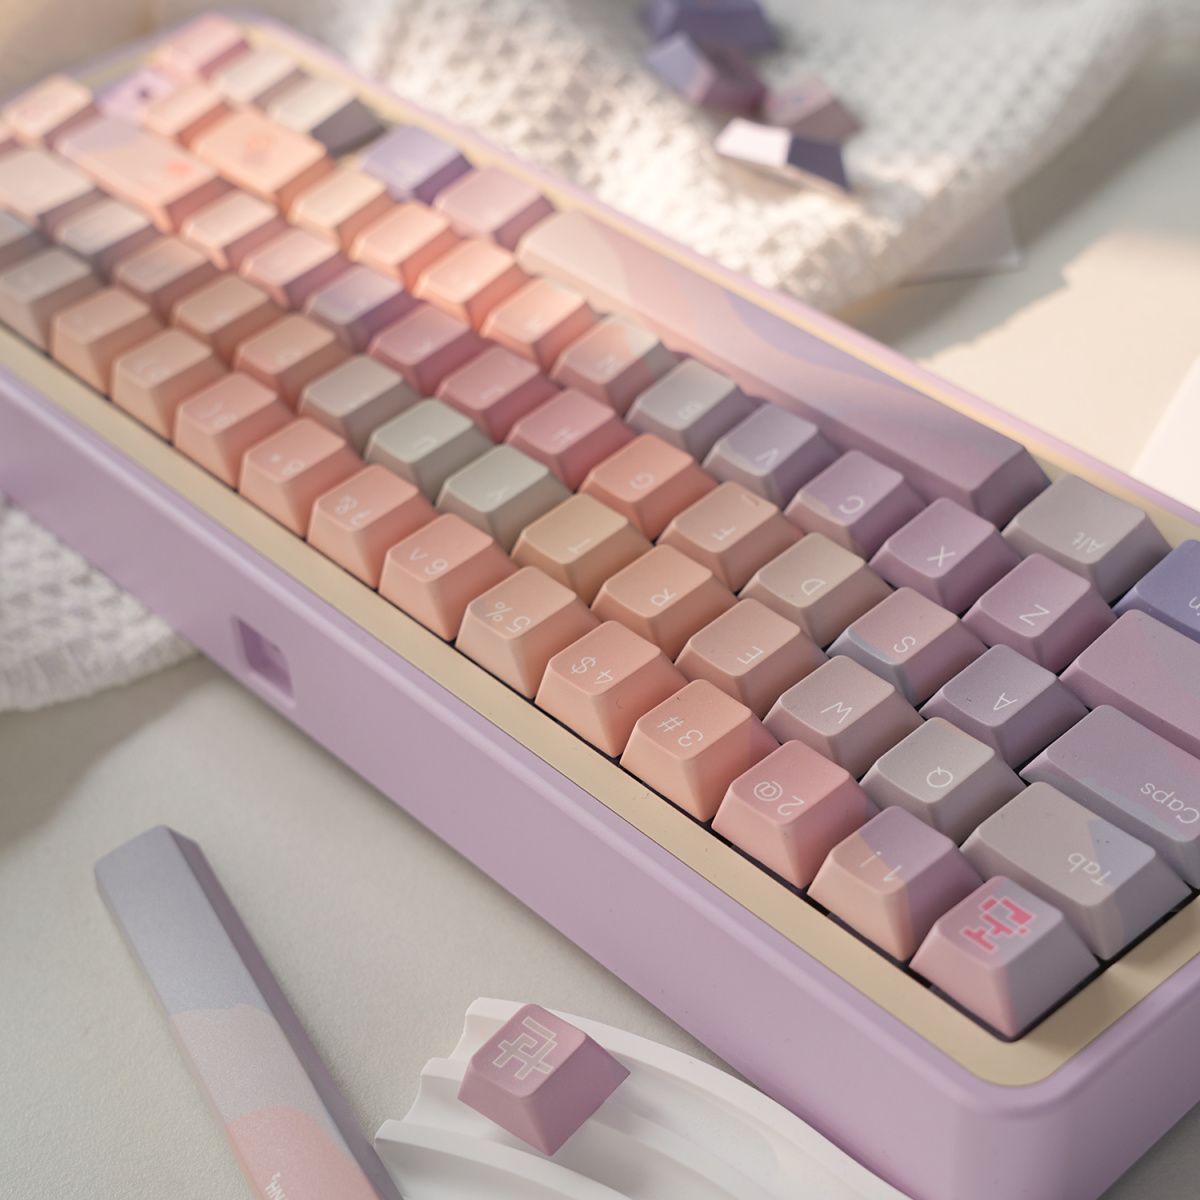 Dopamine Style Keycap Kit Pink Pink Cherry Profile Key Caps PBT Material Gift for Friends